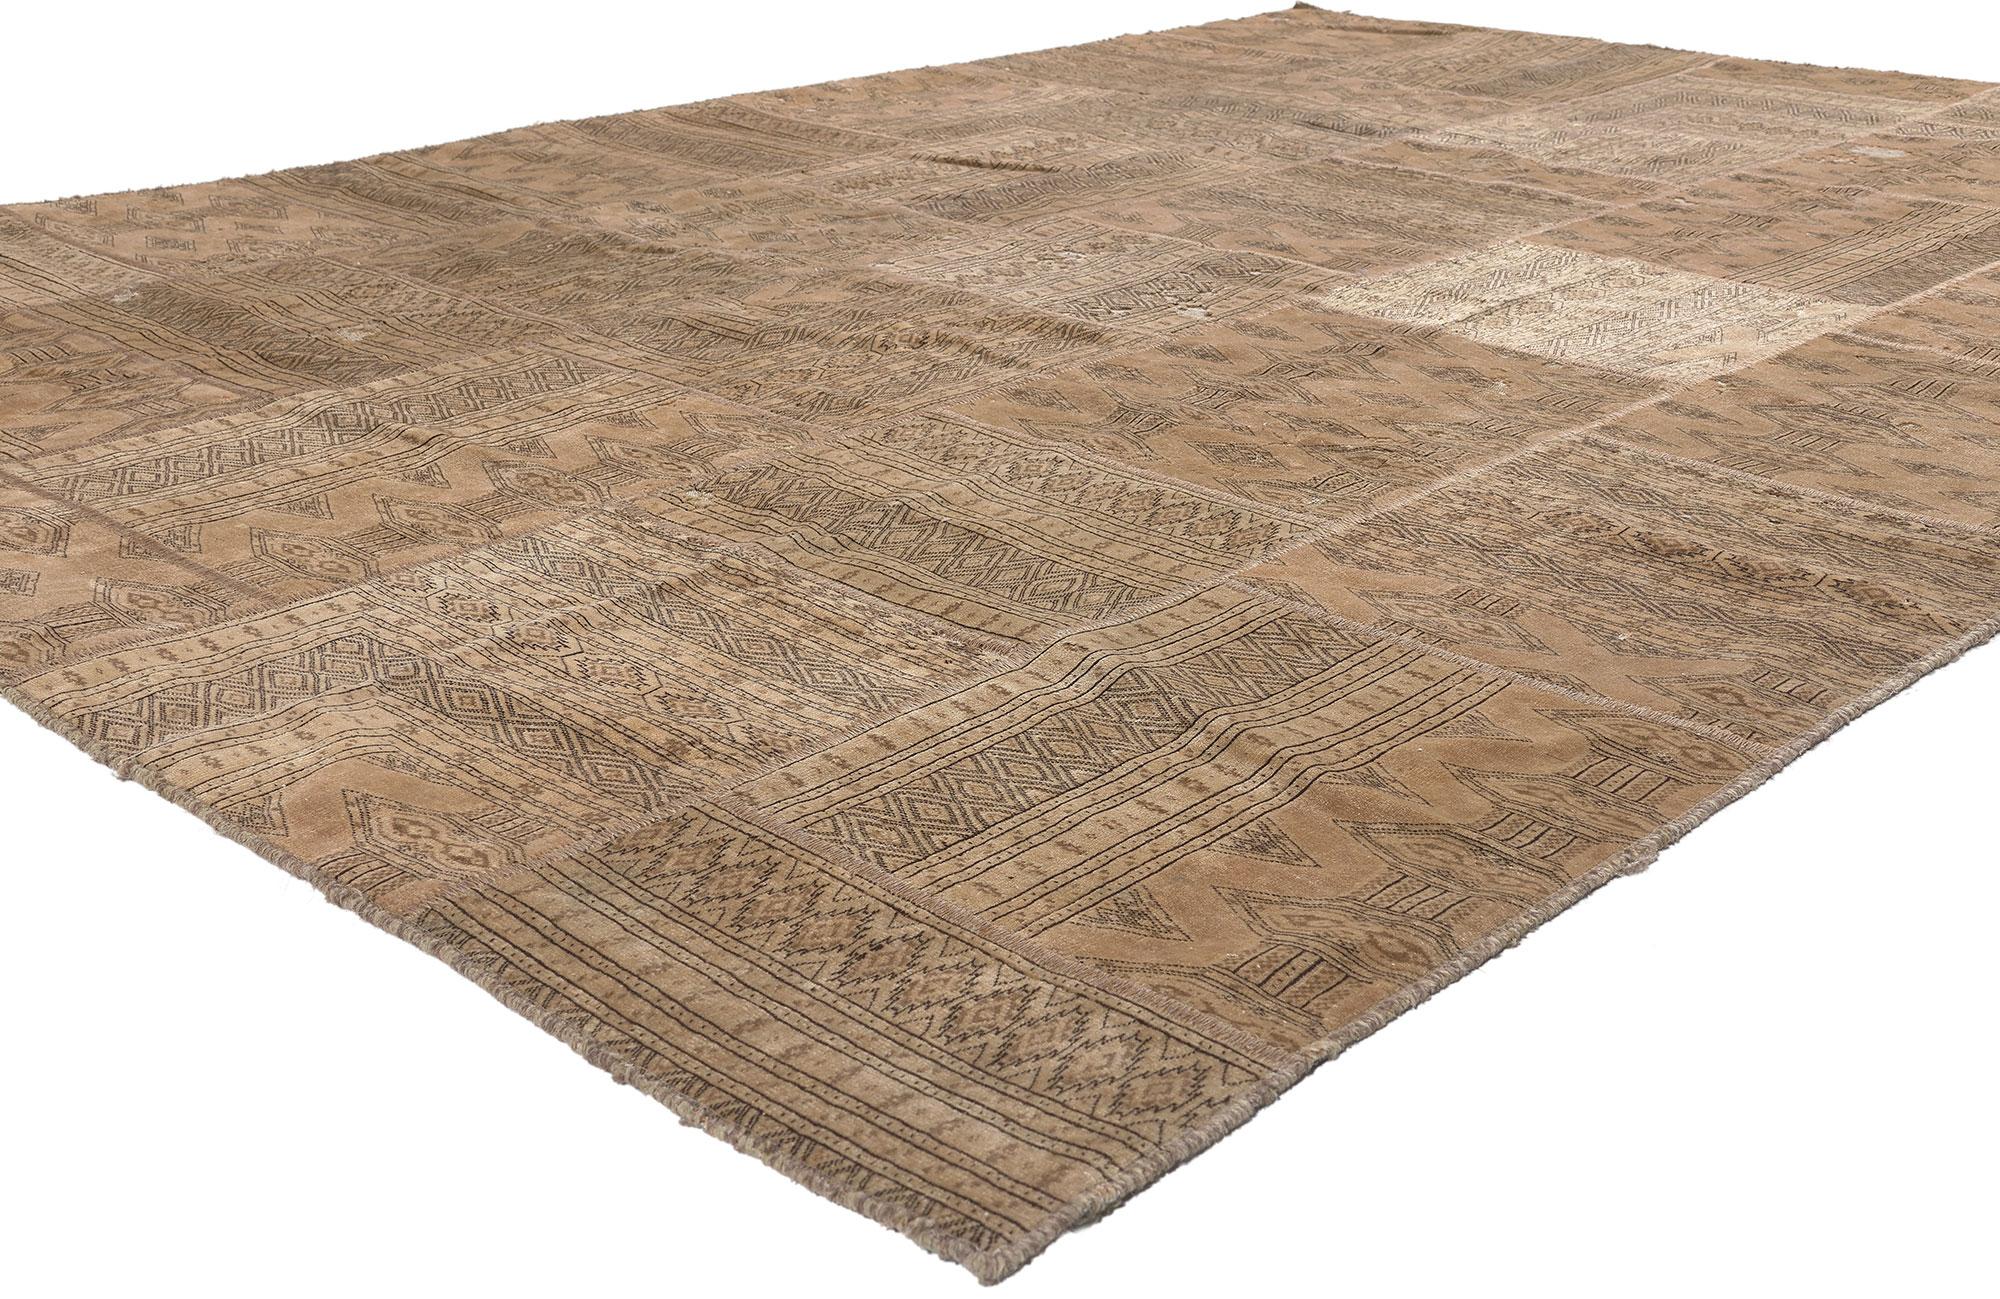 78587 Vintage Persian Patchwork Rug, 06'10 x 09'10. 
Emanating masculine appeal and nomadic charm, this vintage Persian patchwork rug is a captivating vision of woven beauty. The Tekke designs and earthy colorway woven into this piece work together